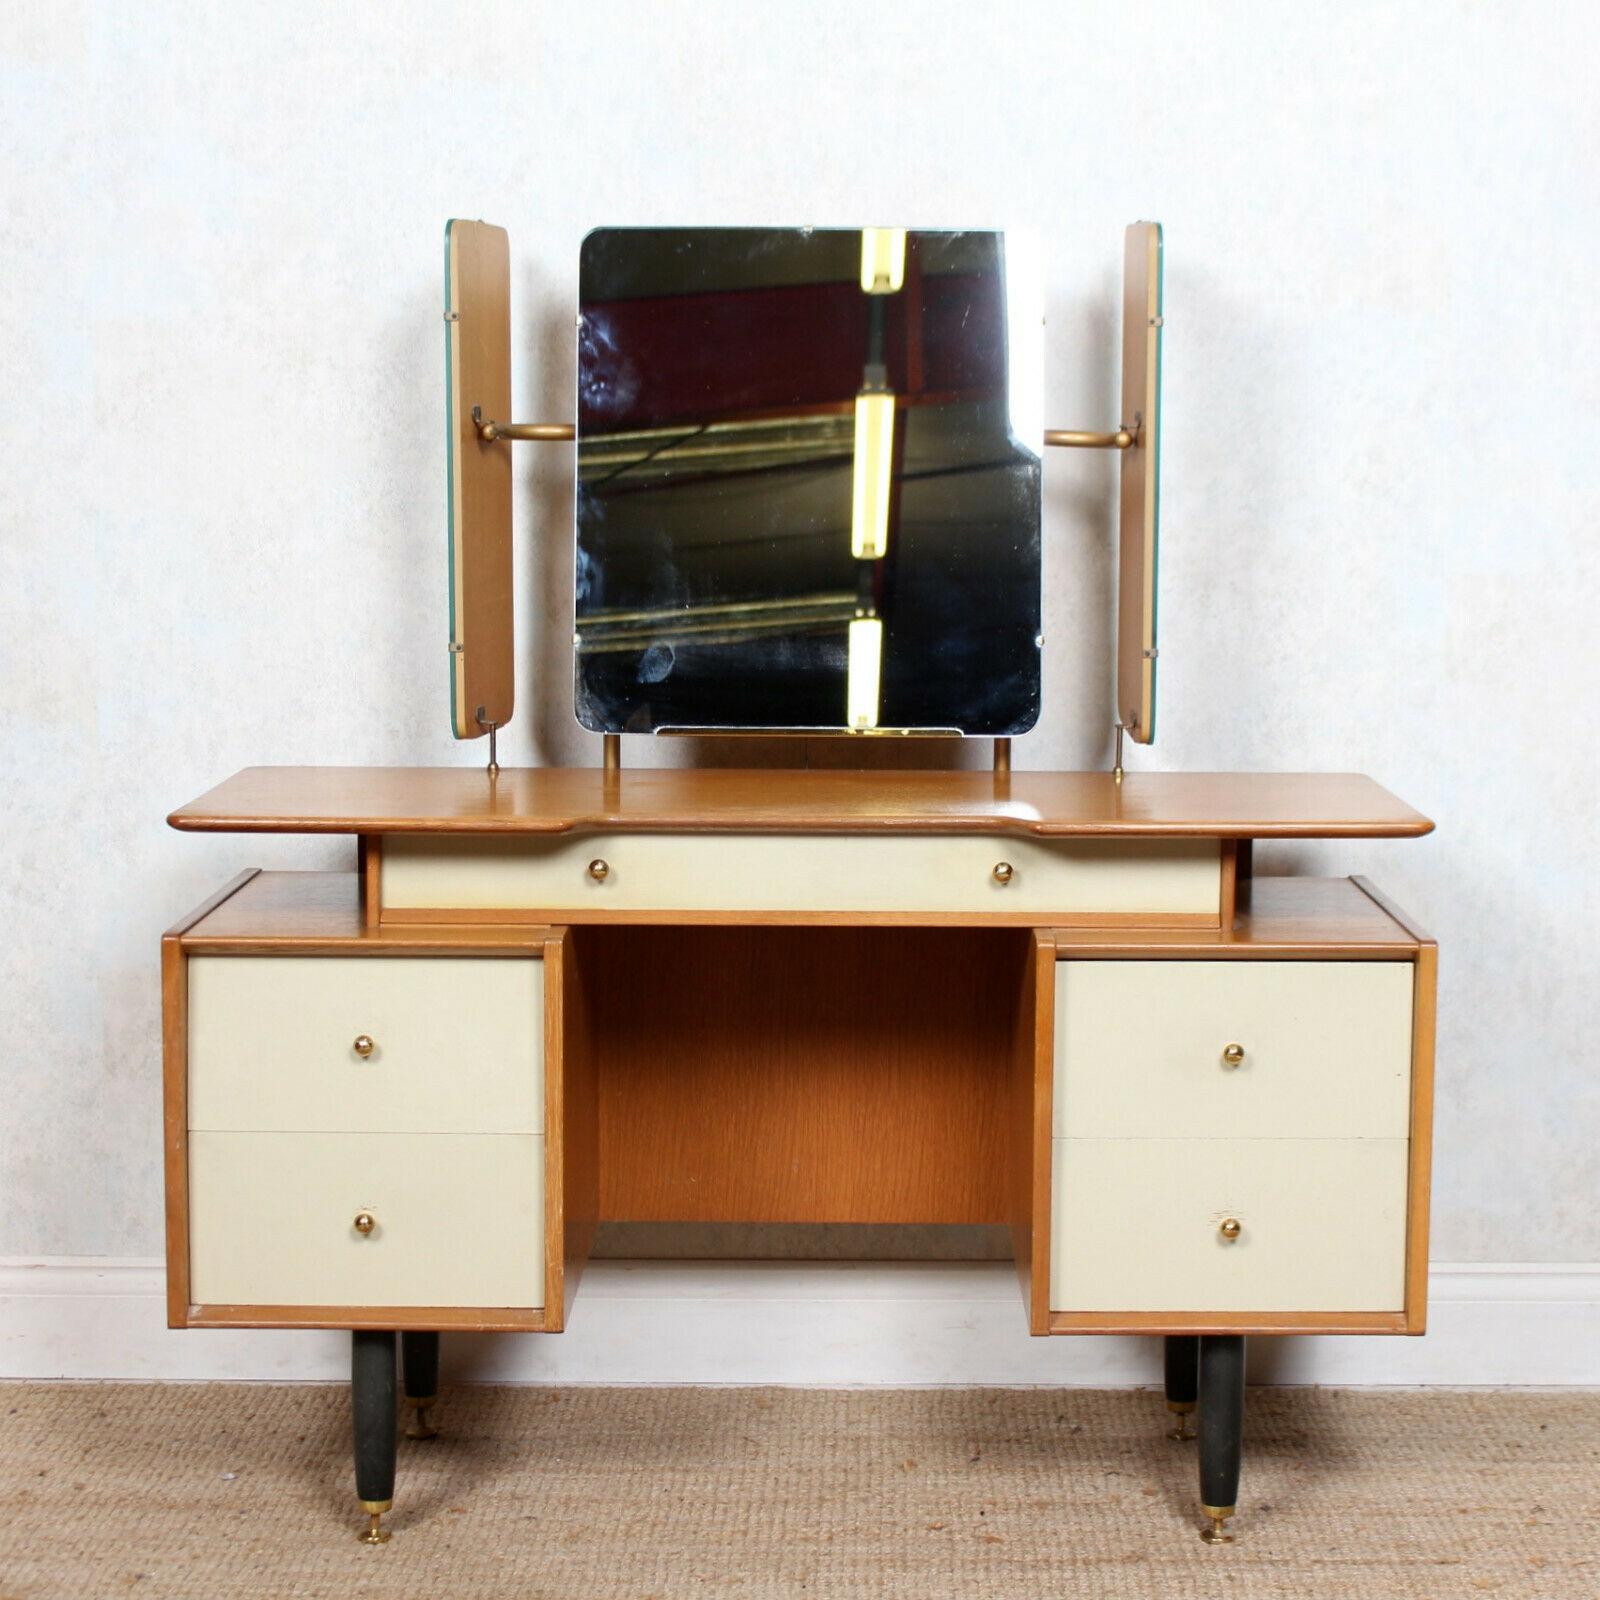 An impressive mid-20th century dressing table by G Plan / E Gomme from the companies iconic China white range with the distinctive white lacquered drawer fronts and blonde oak framed carcass.

England, circa 1970.